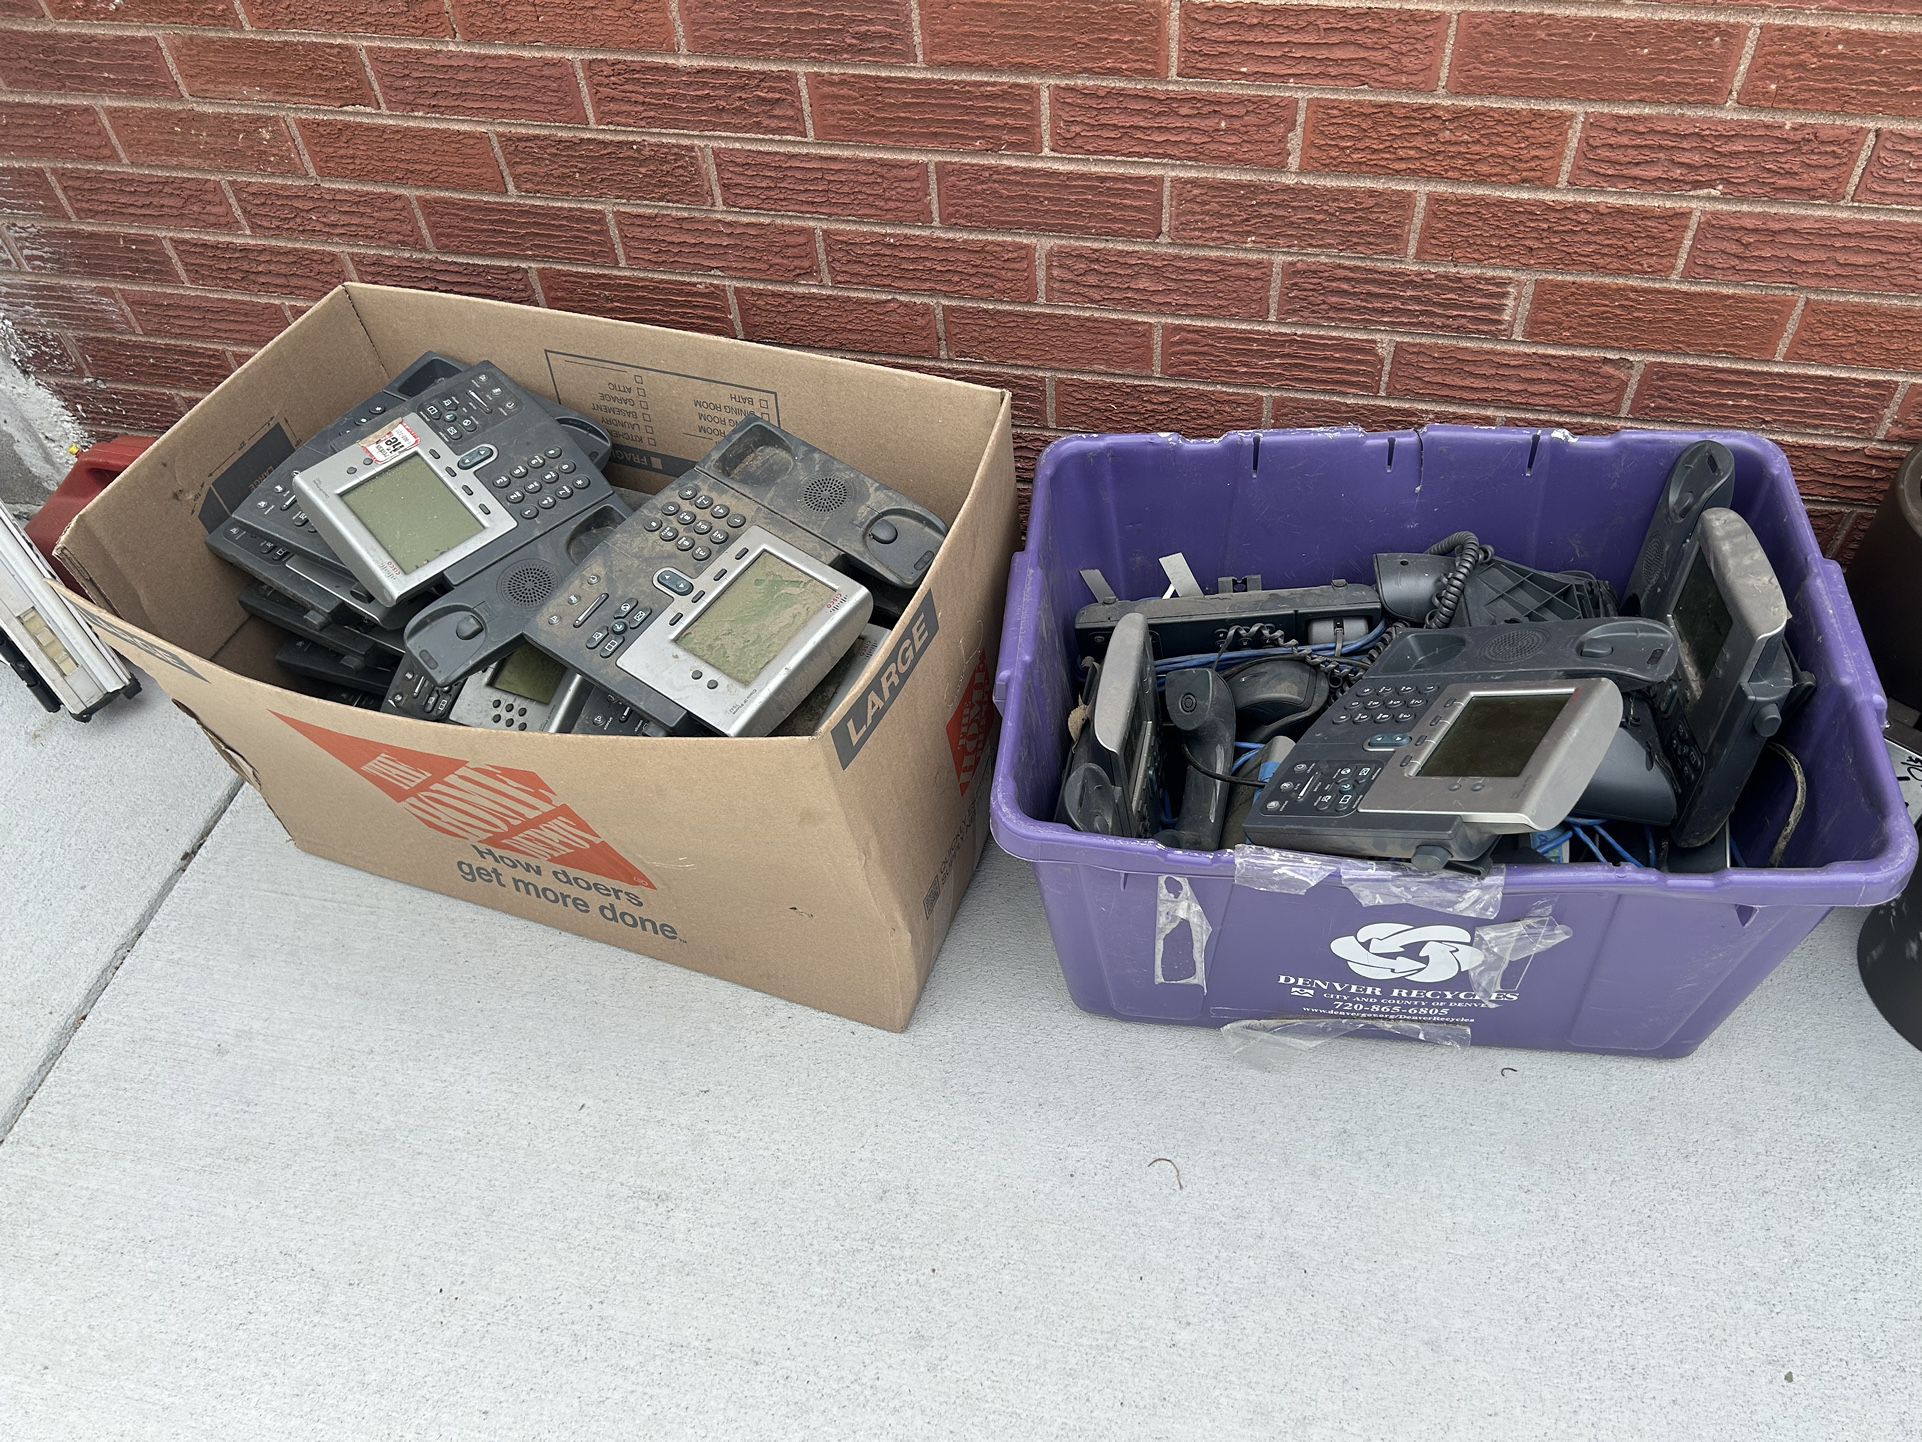 FREE FREE FREE MORE THAN 40 PIECES OF CISCO IP PHONES. UNITS NOT TESTED GOOD FOR SOMEONE WHO RECYCLES OR WANT TO USE IT AS PARTS